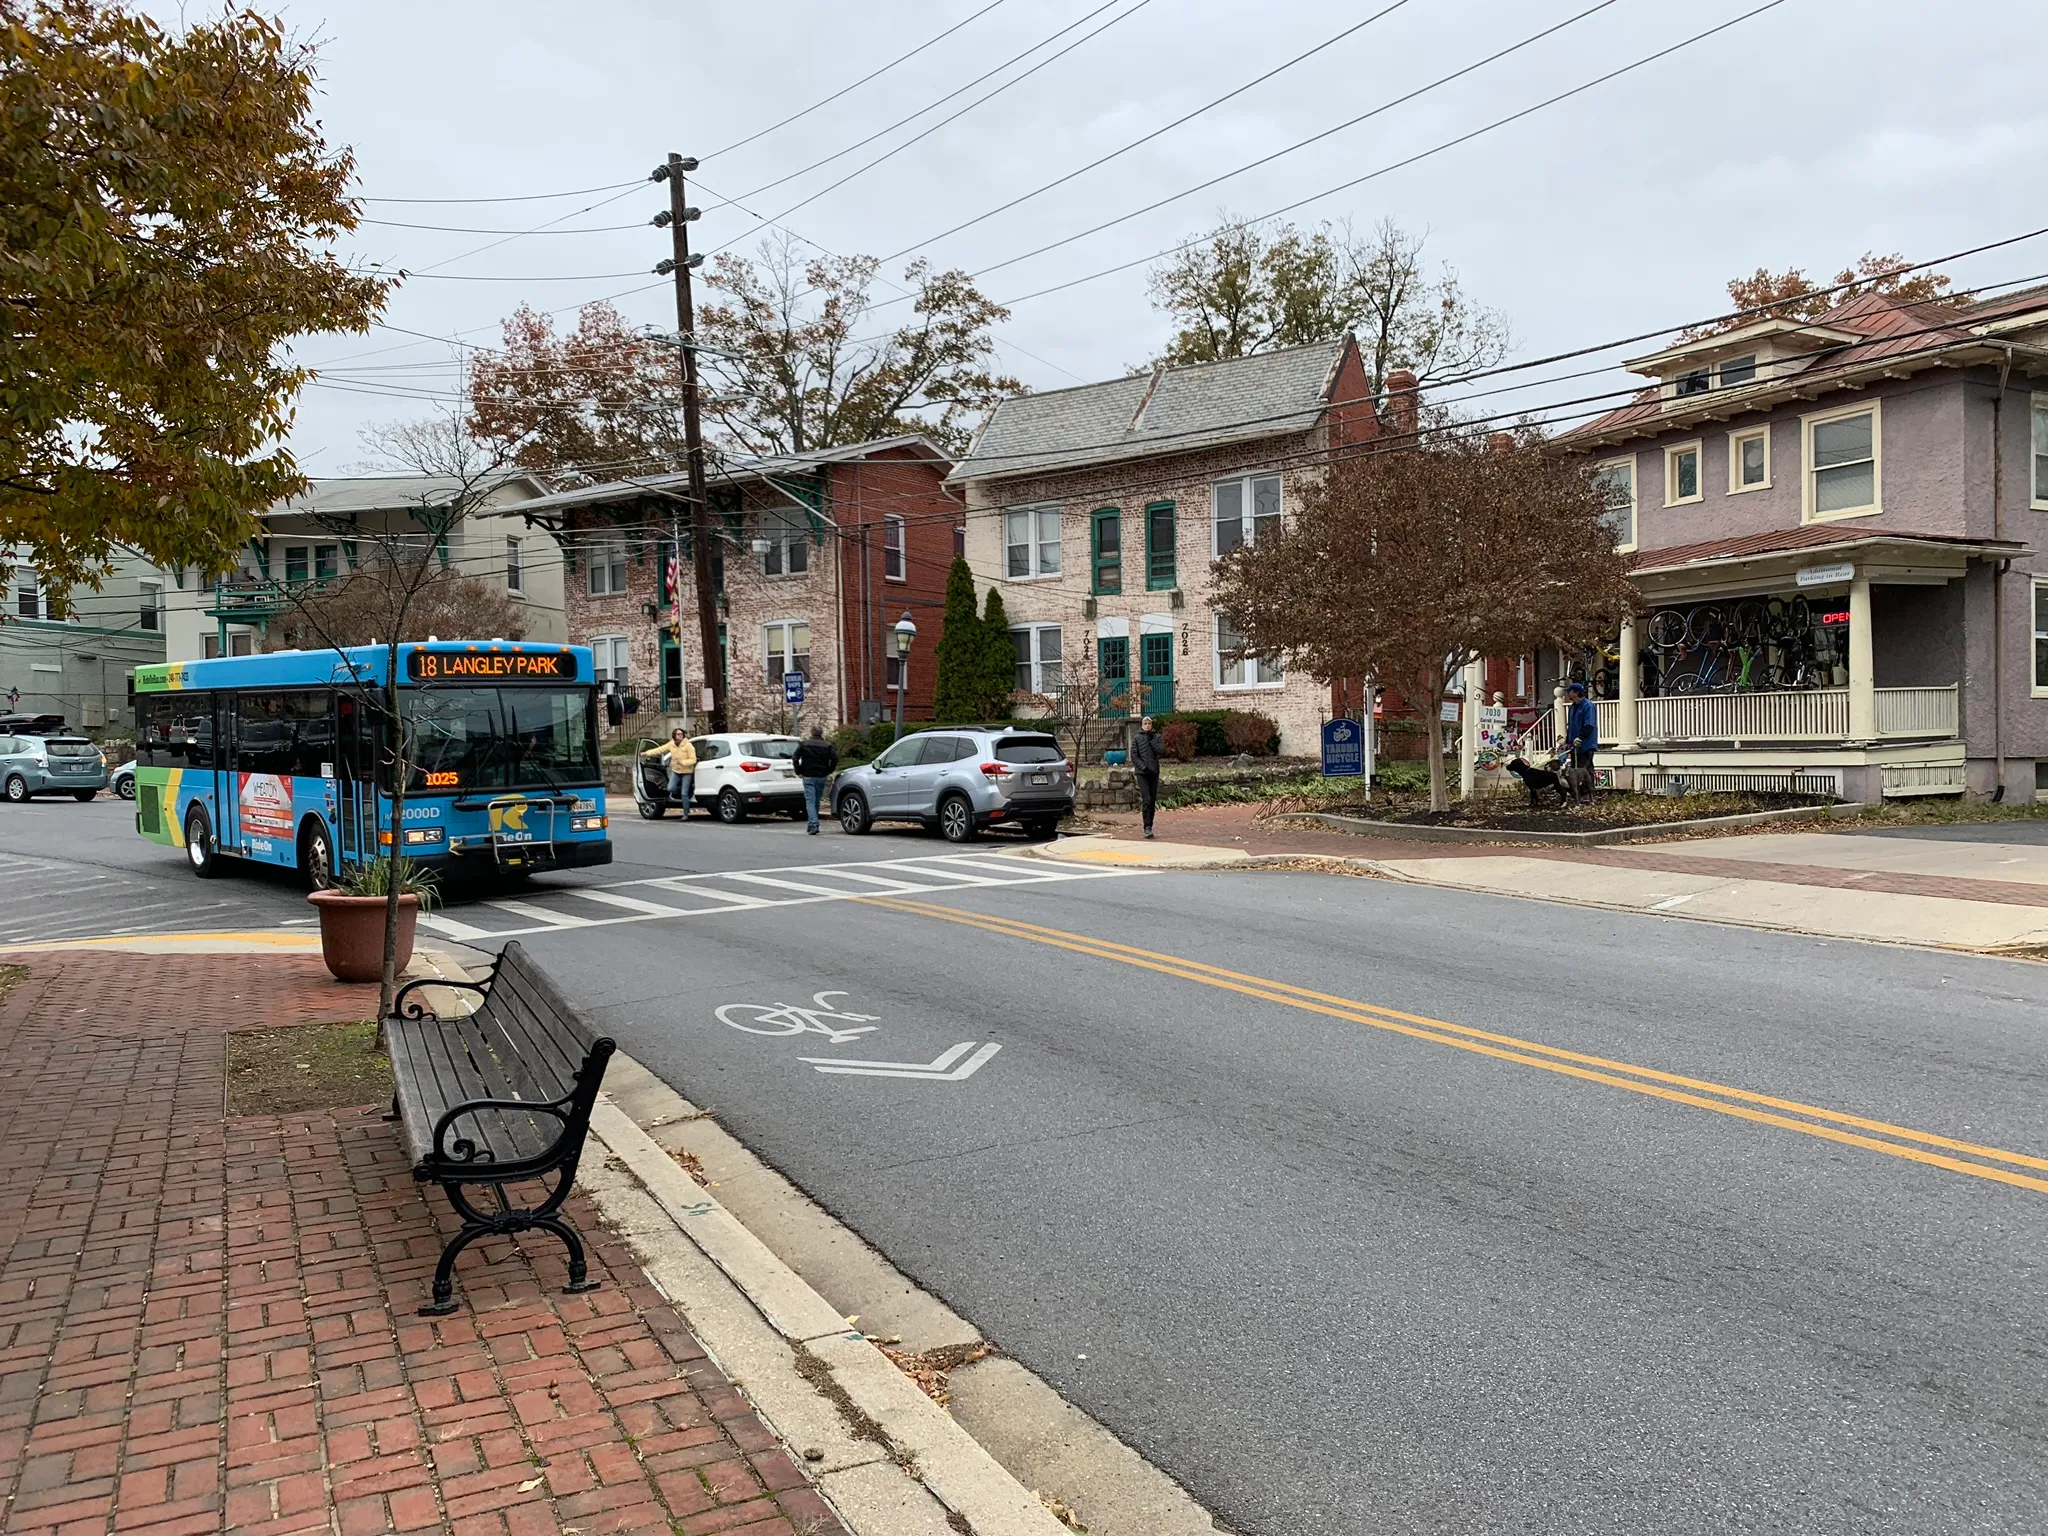 A photo of a bus approaching a stop in Takoma Park, Maryland. The bus is rounding a gentle bend in the road alongside a brick sidewalk. In the road, a striped crosswalk and bicycle right-of-way marking are visible. The bus is bright blue with green and yellow vertical chevron-shaped stripes at the rear.